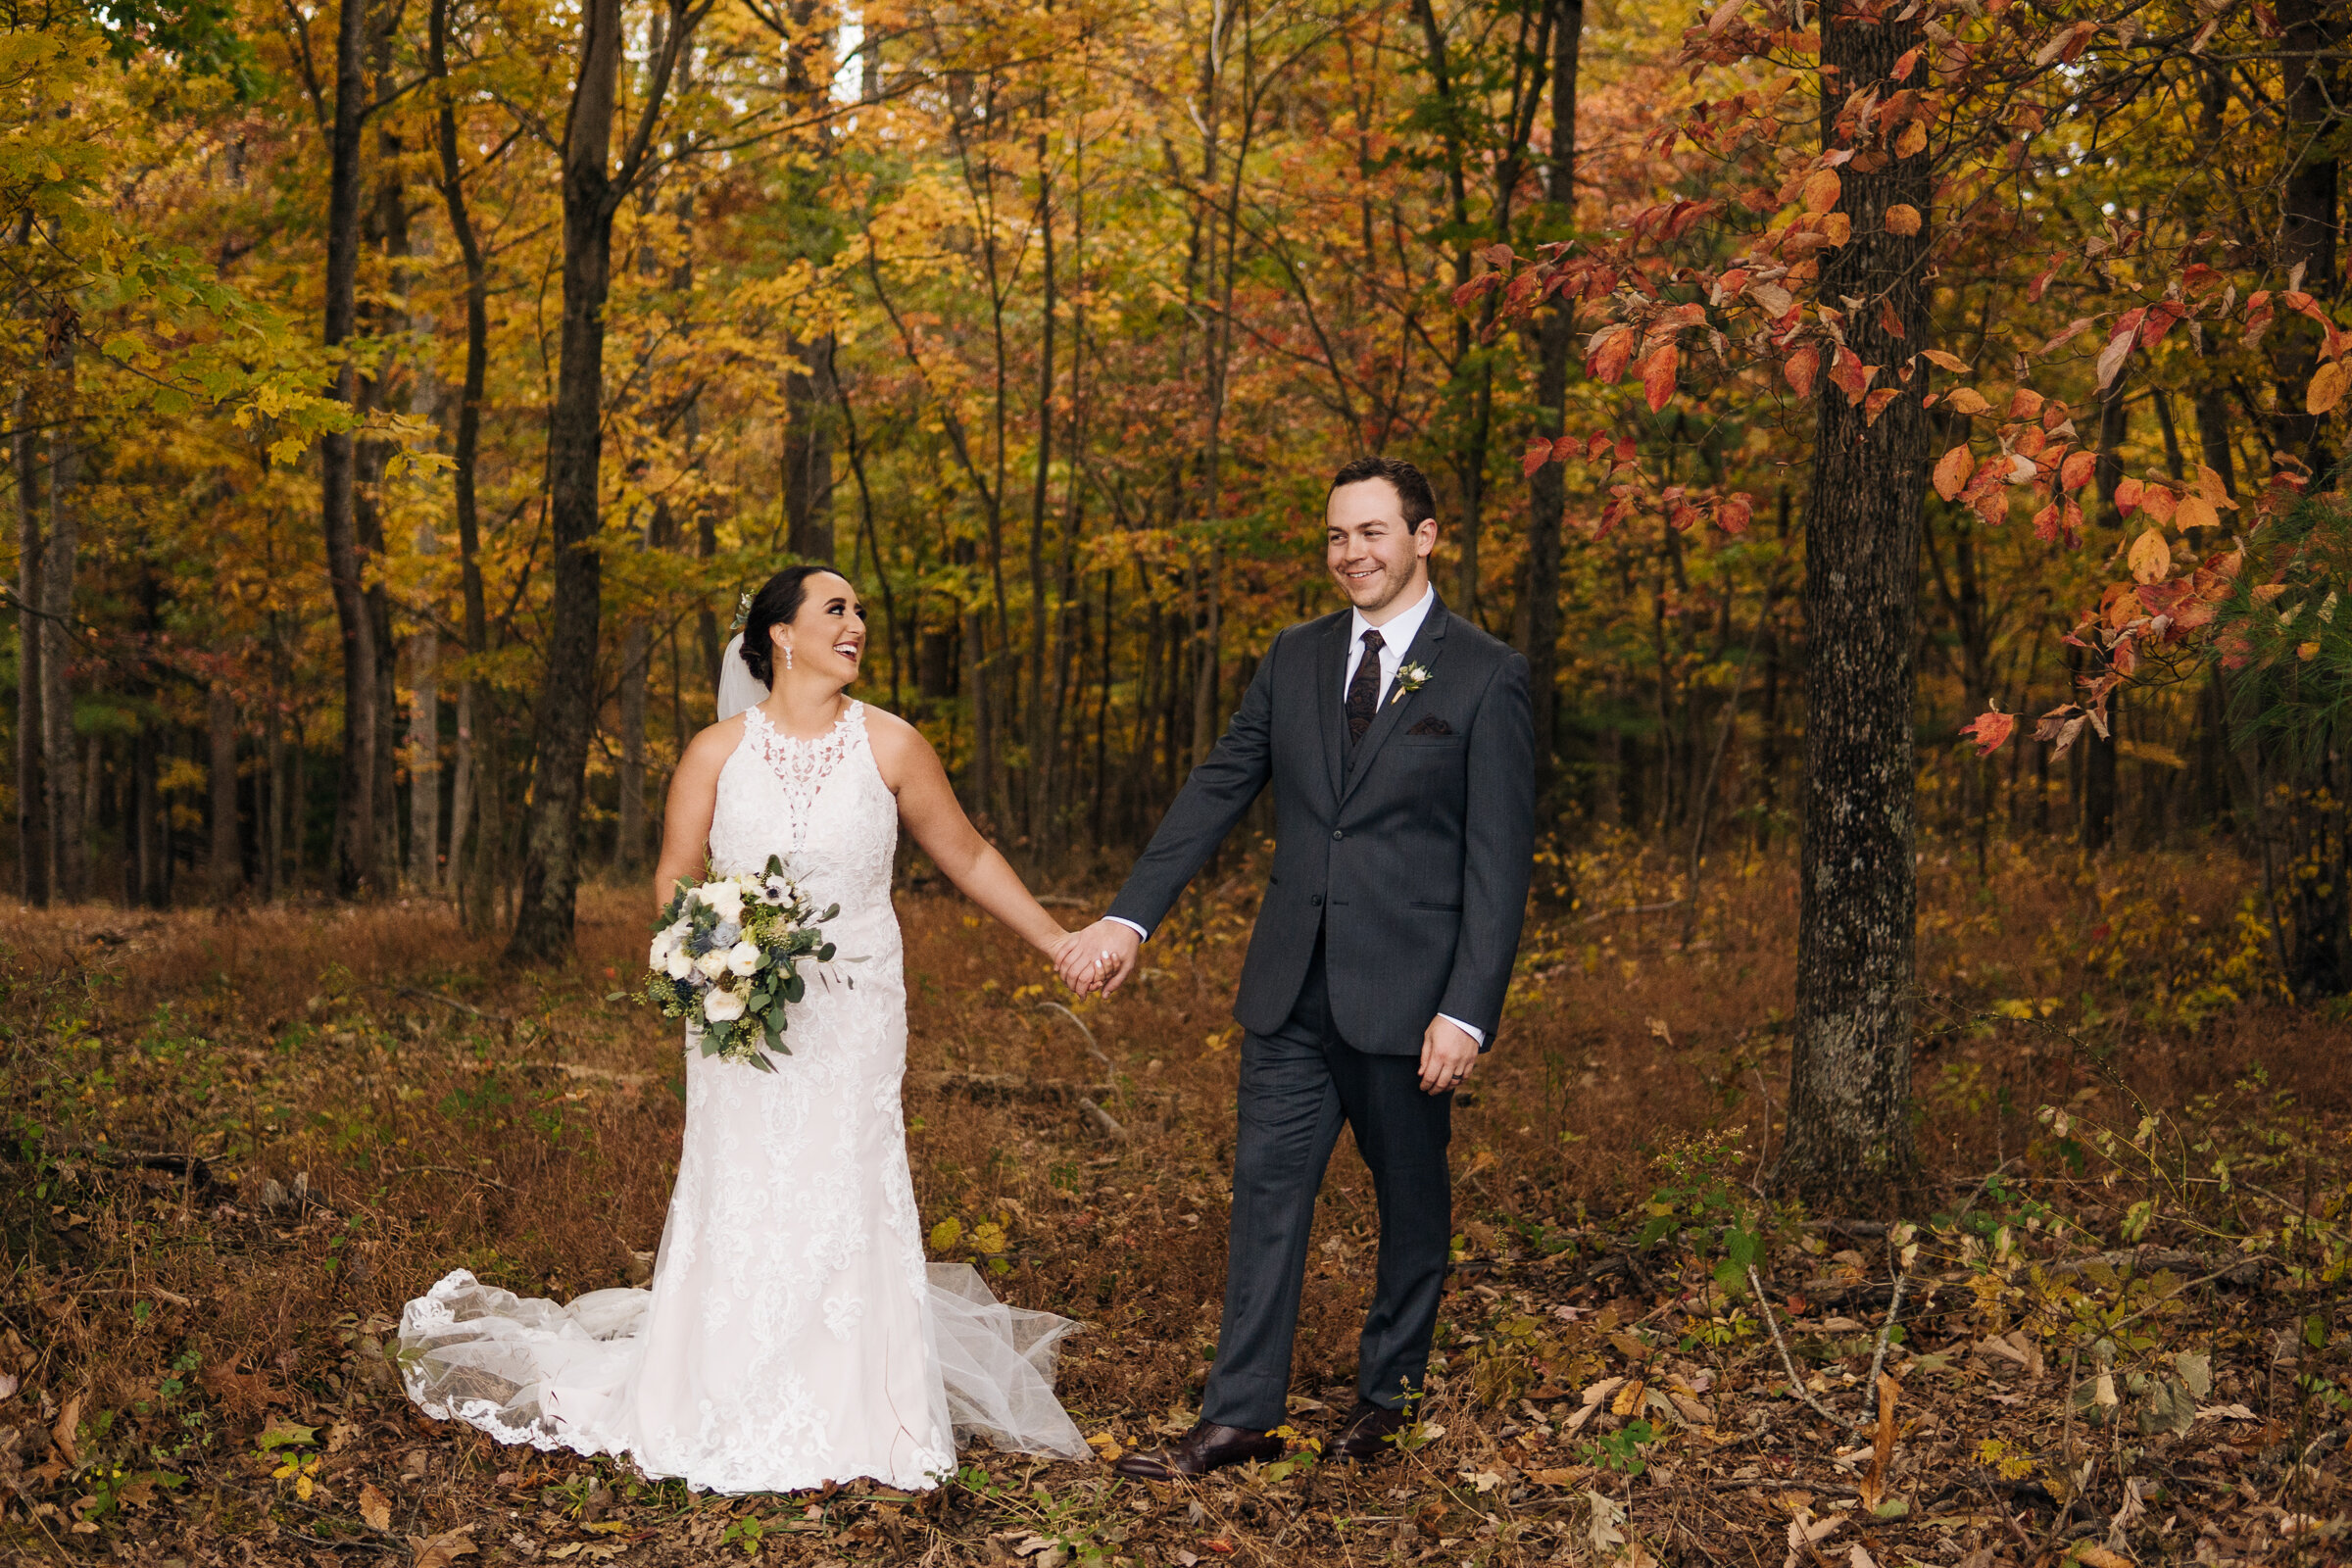 Garrett & Caitlin's Fall Wedding at the Four Winds at North Mountain,  Virginia